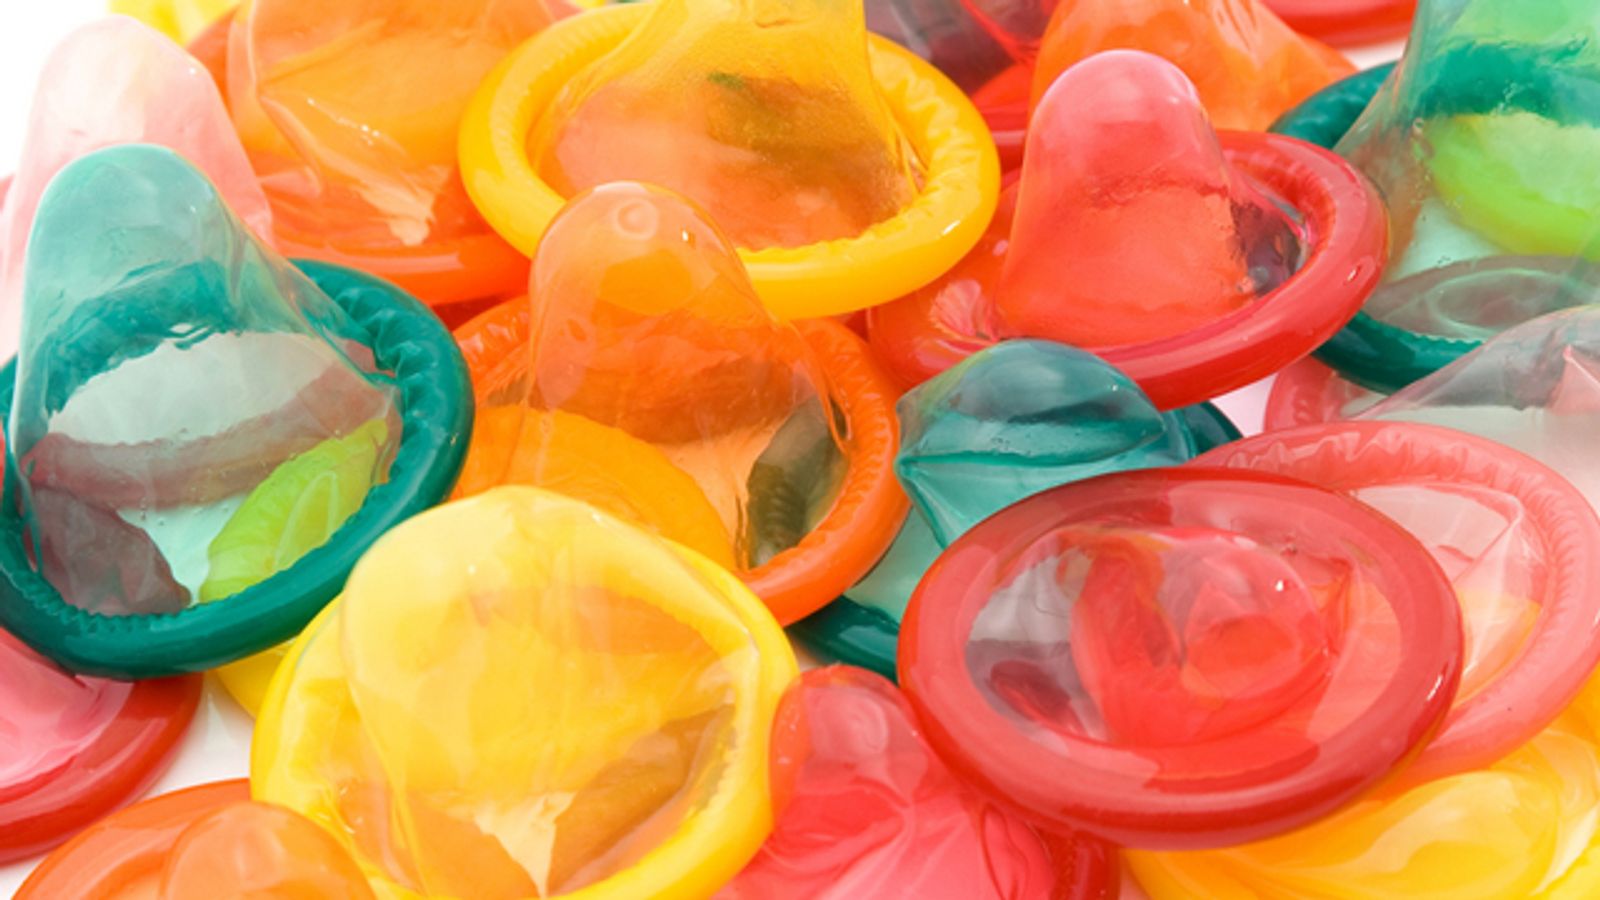 Americans Could Lose Jobs Over Cheaper Chinese Condoms